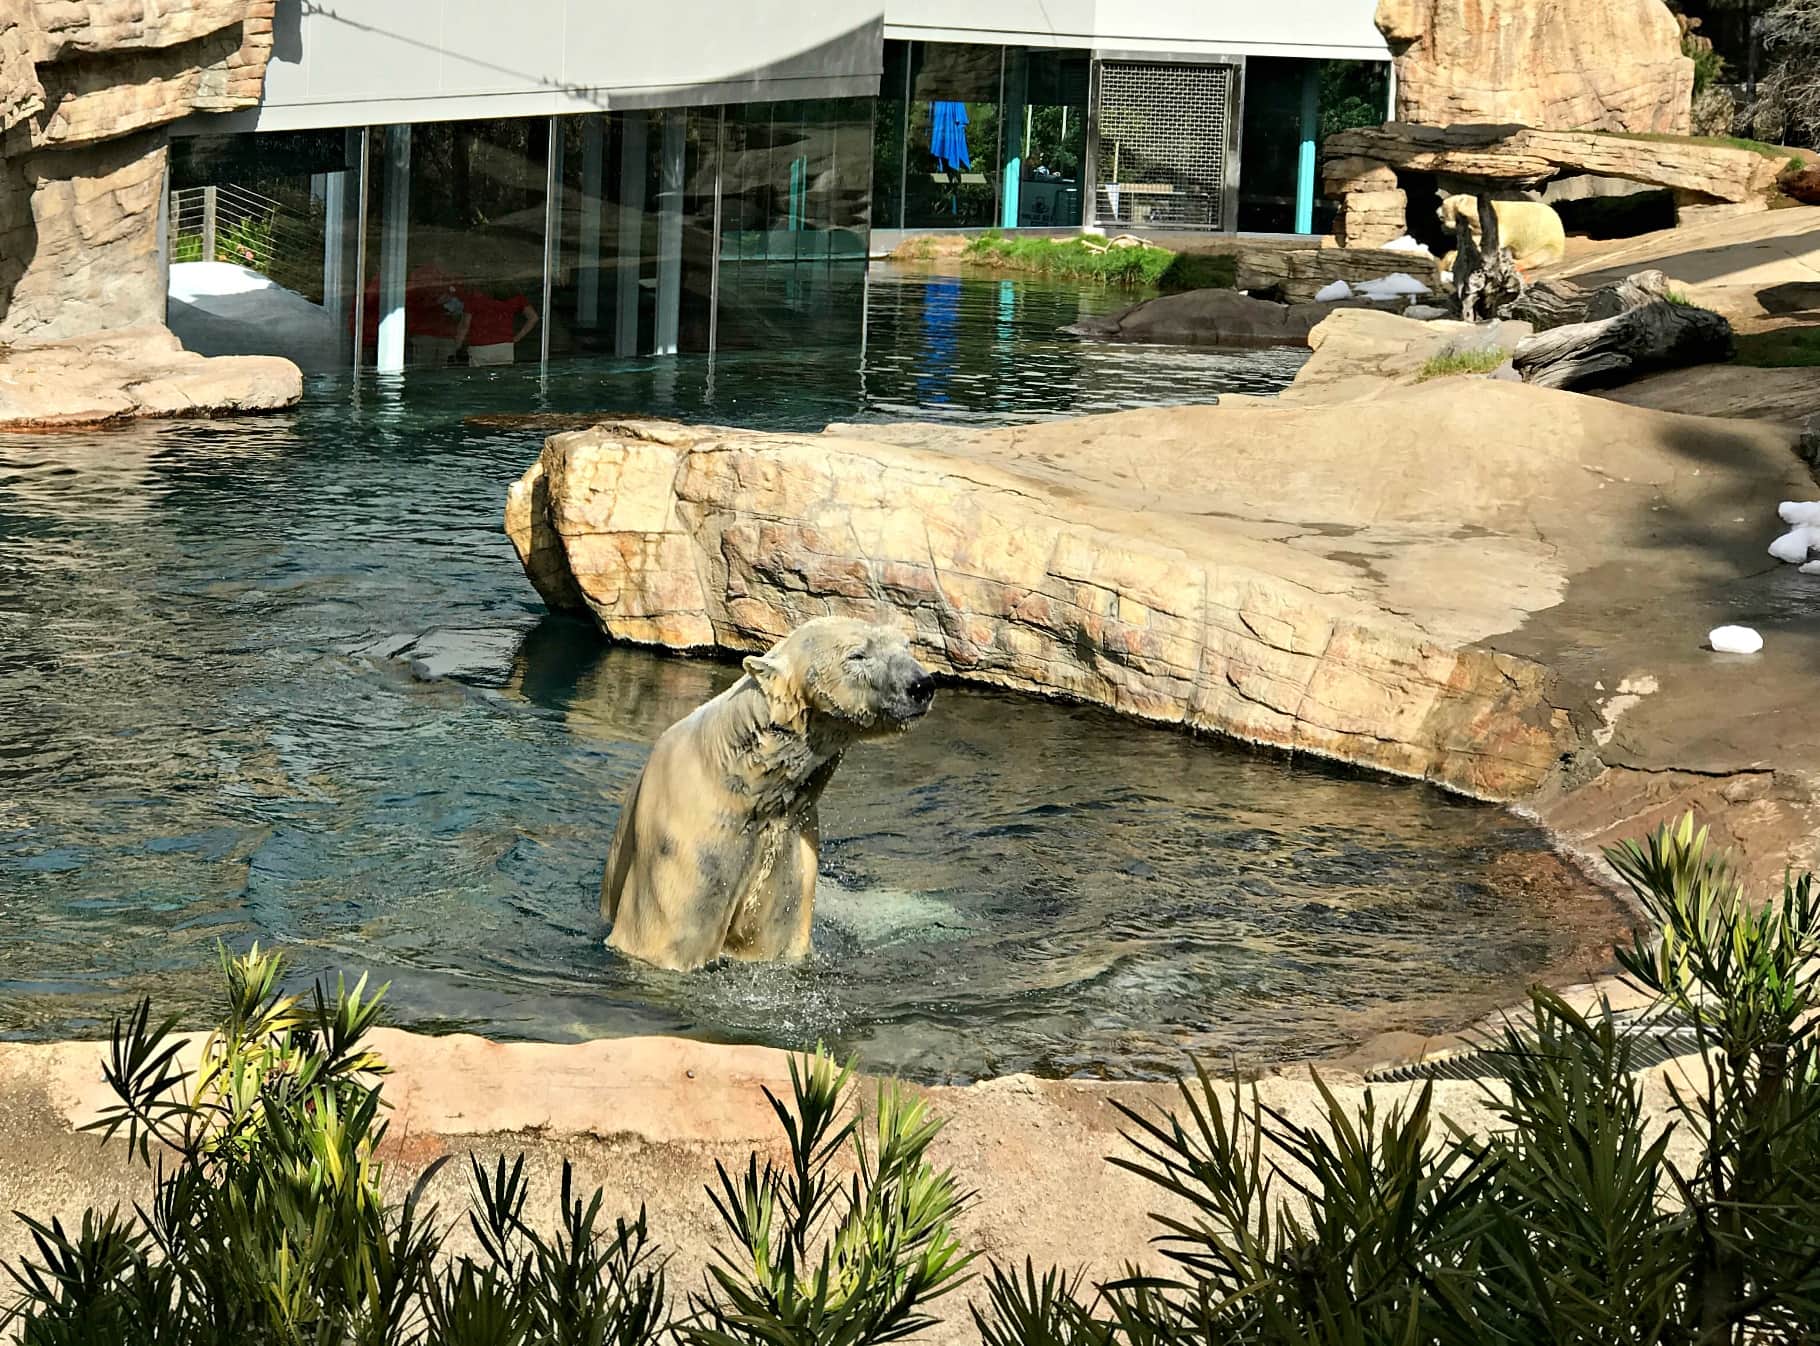 A polar bear taking a swim to cool off during a visit to San Diego Zoo with kids